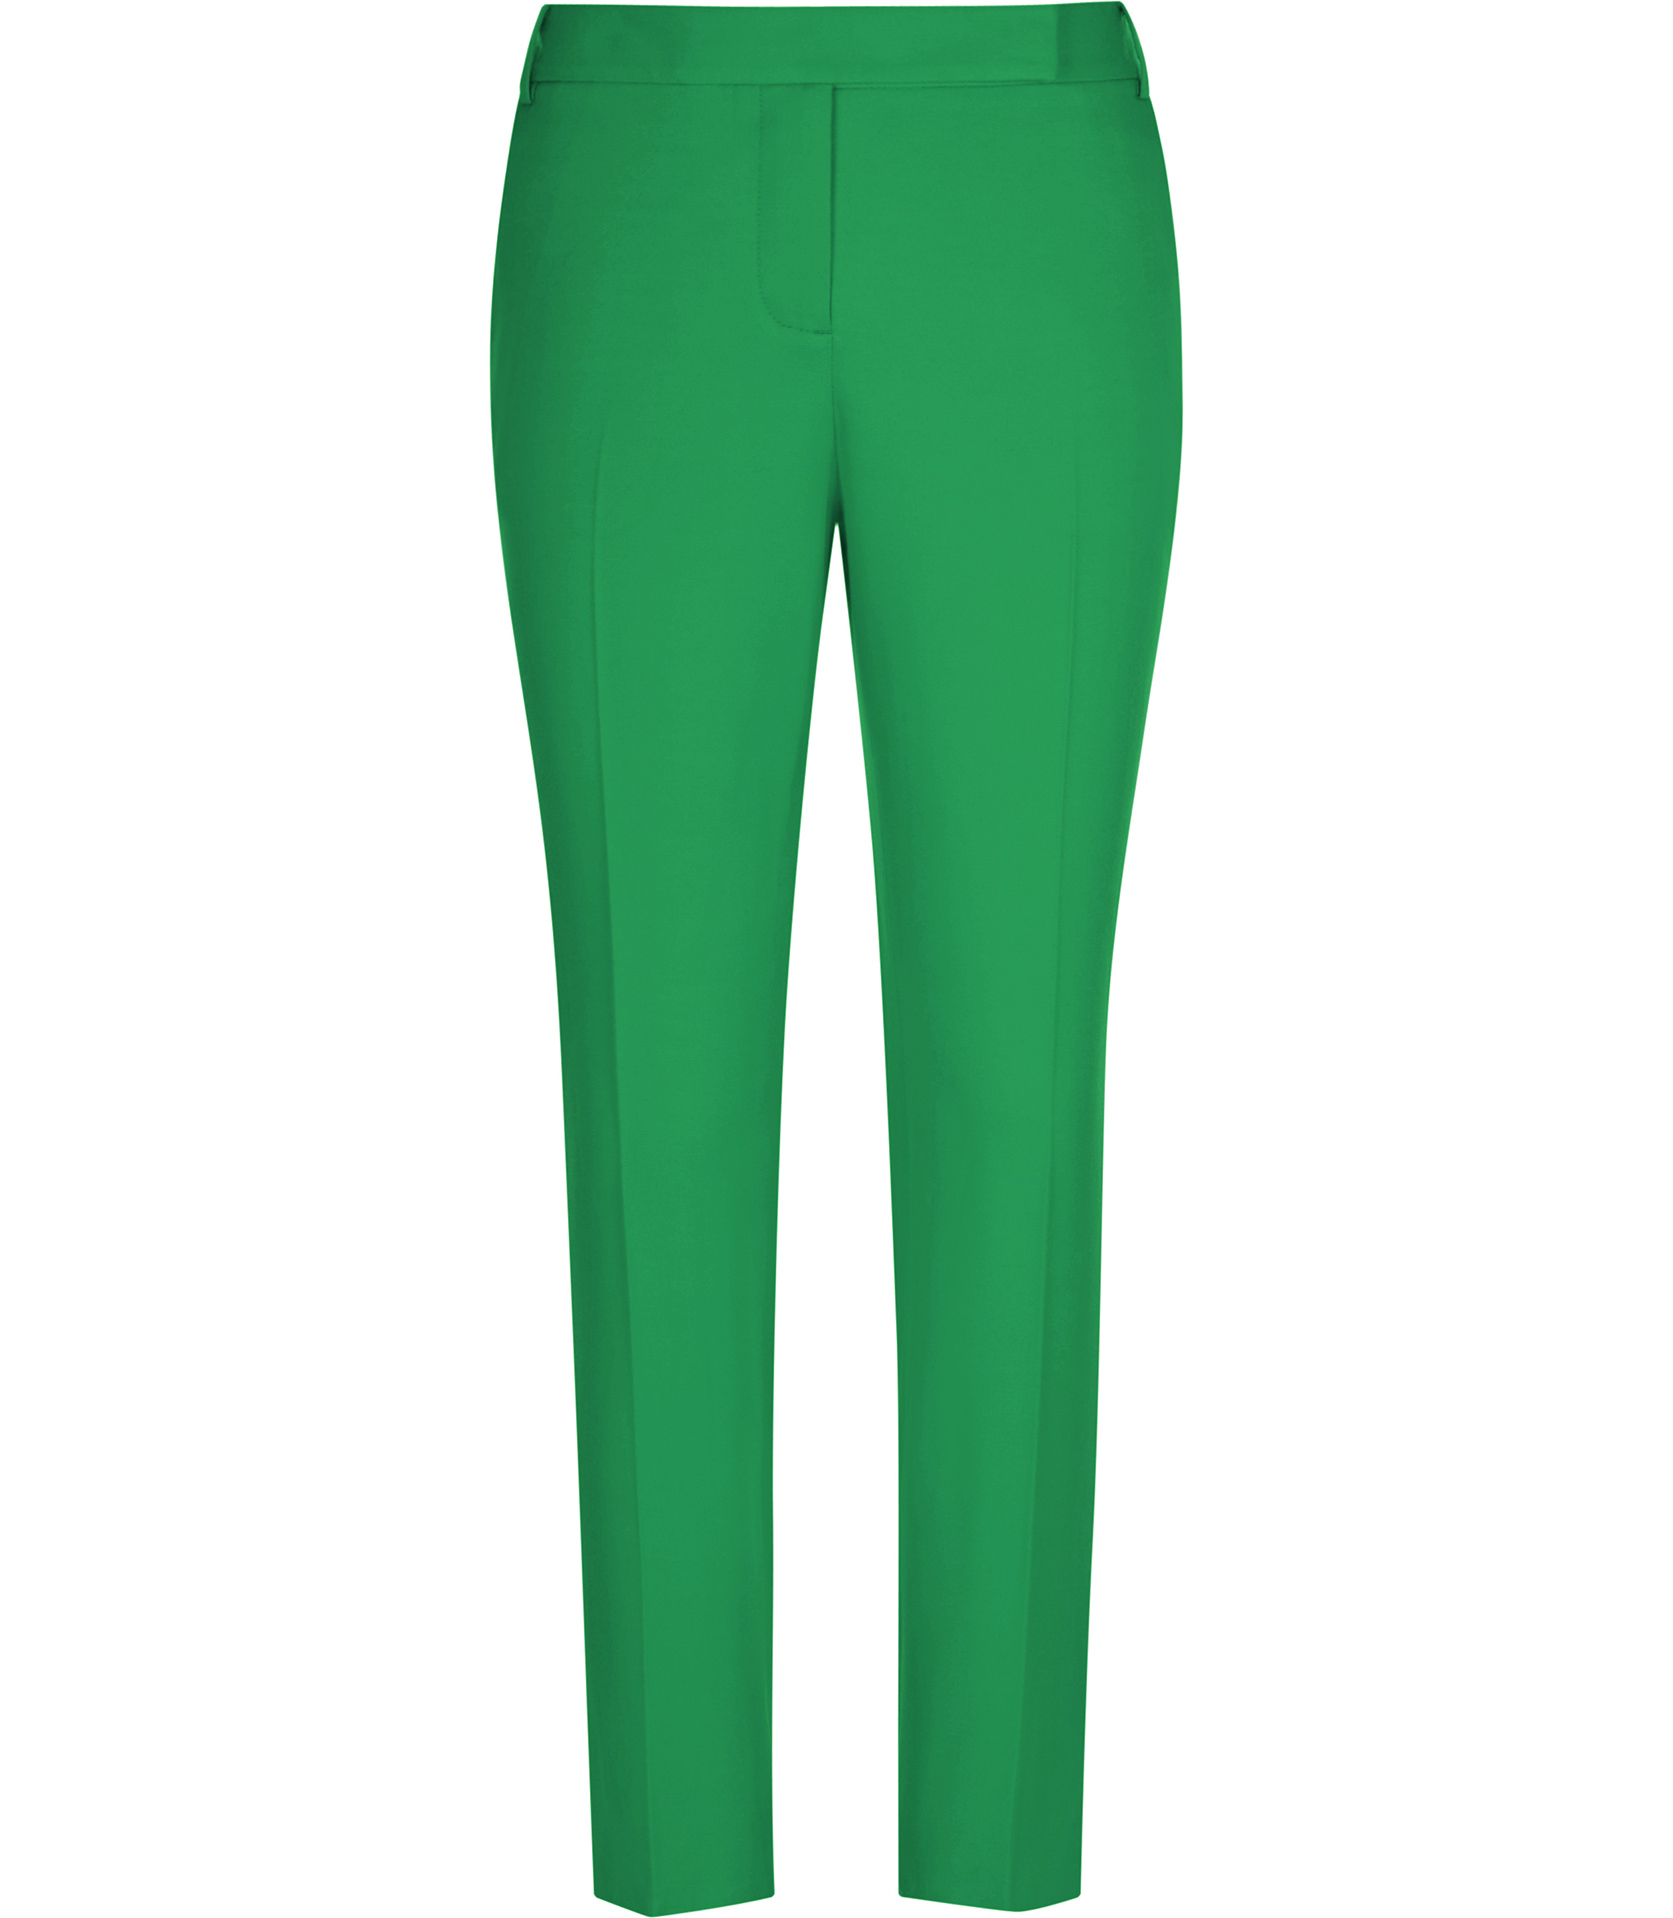 Reiss Joanna Fitted Tailored Trousers in Green - Lyst